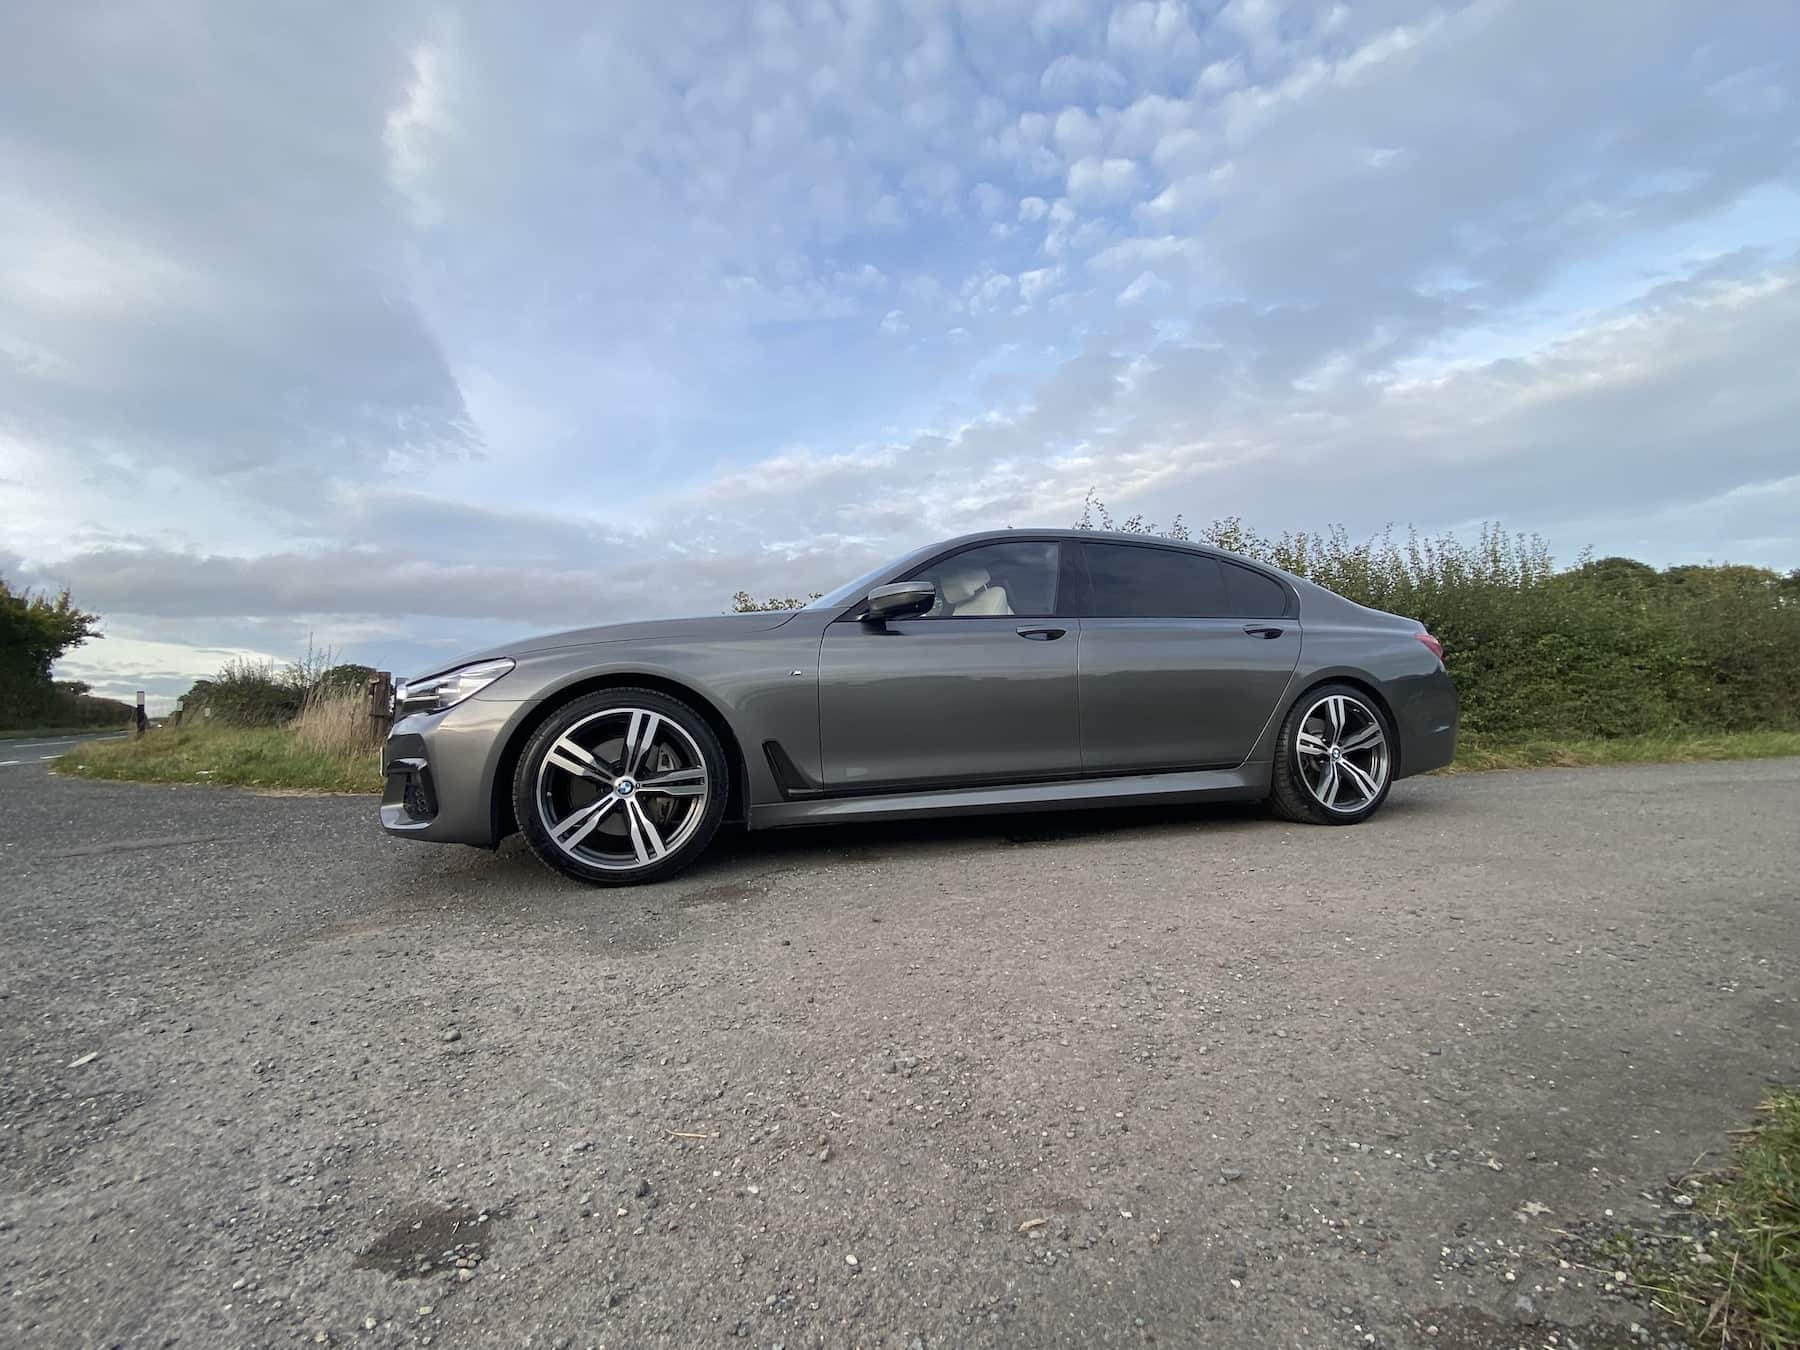 Chauffeur driven Hire in Derby in our new BMW 7 Series